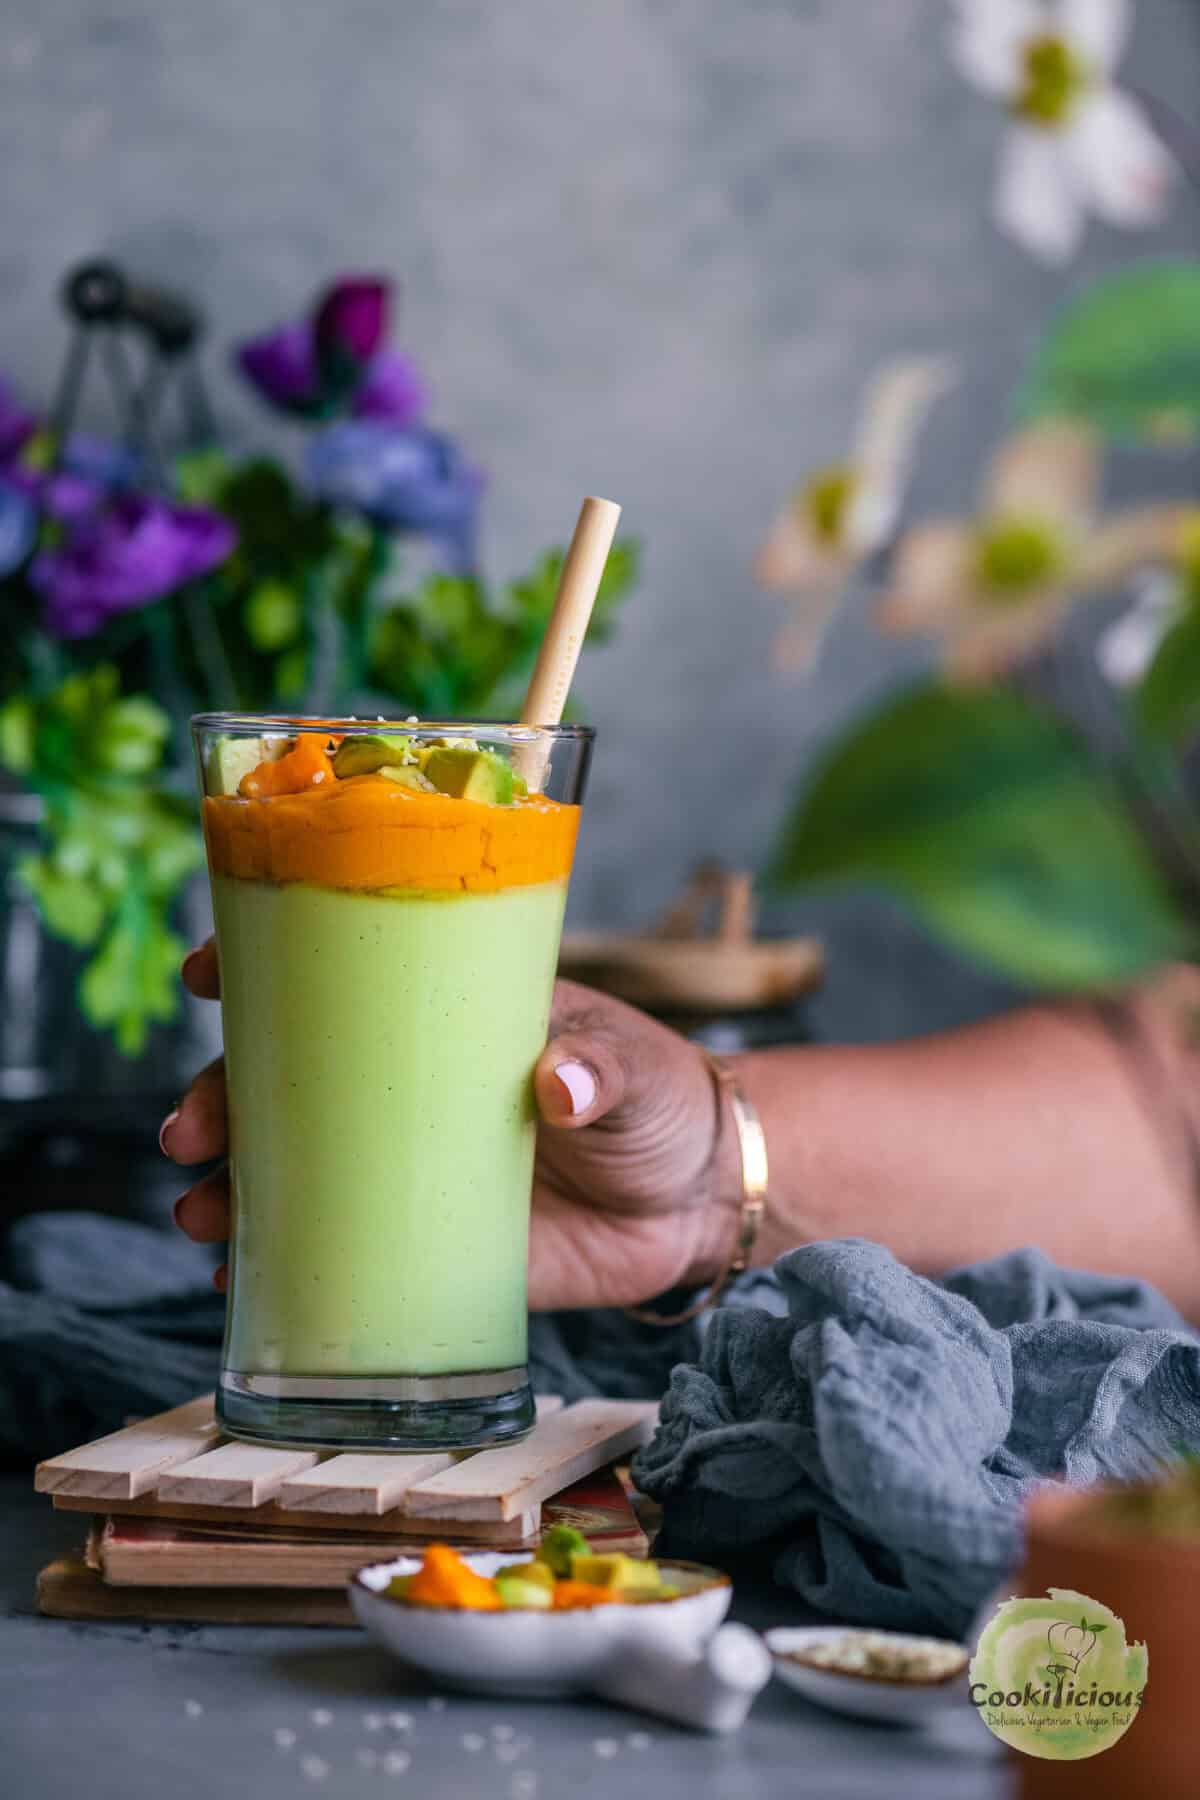 A hand holding a glass that's filled with avocado and mango smoothie.